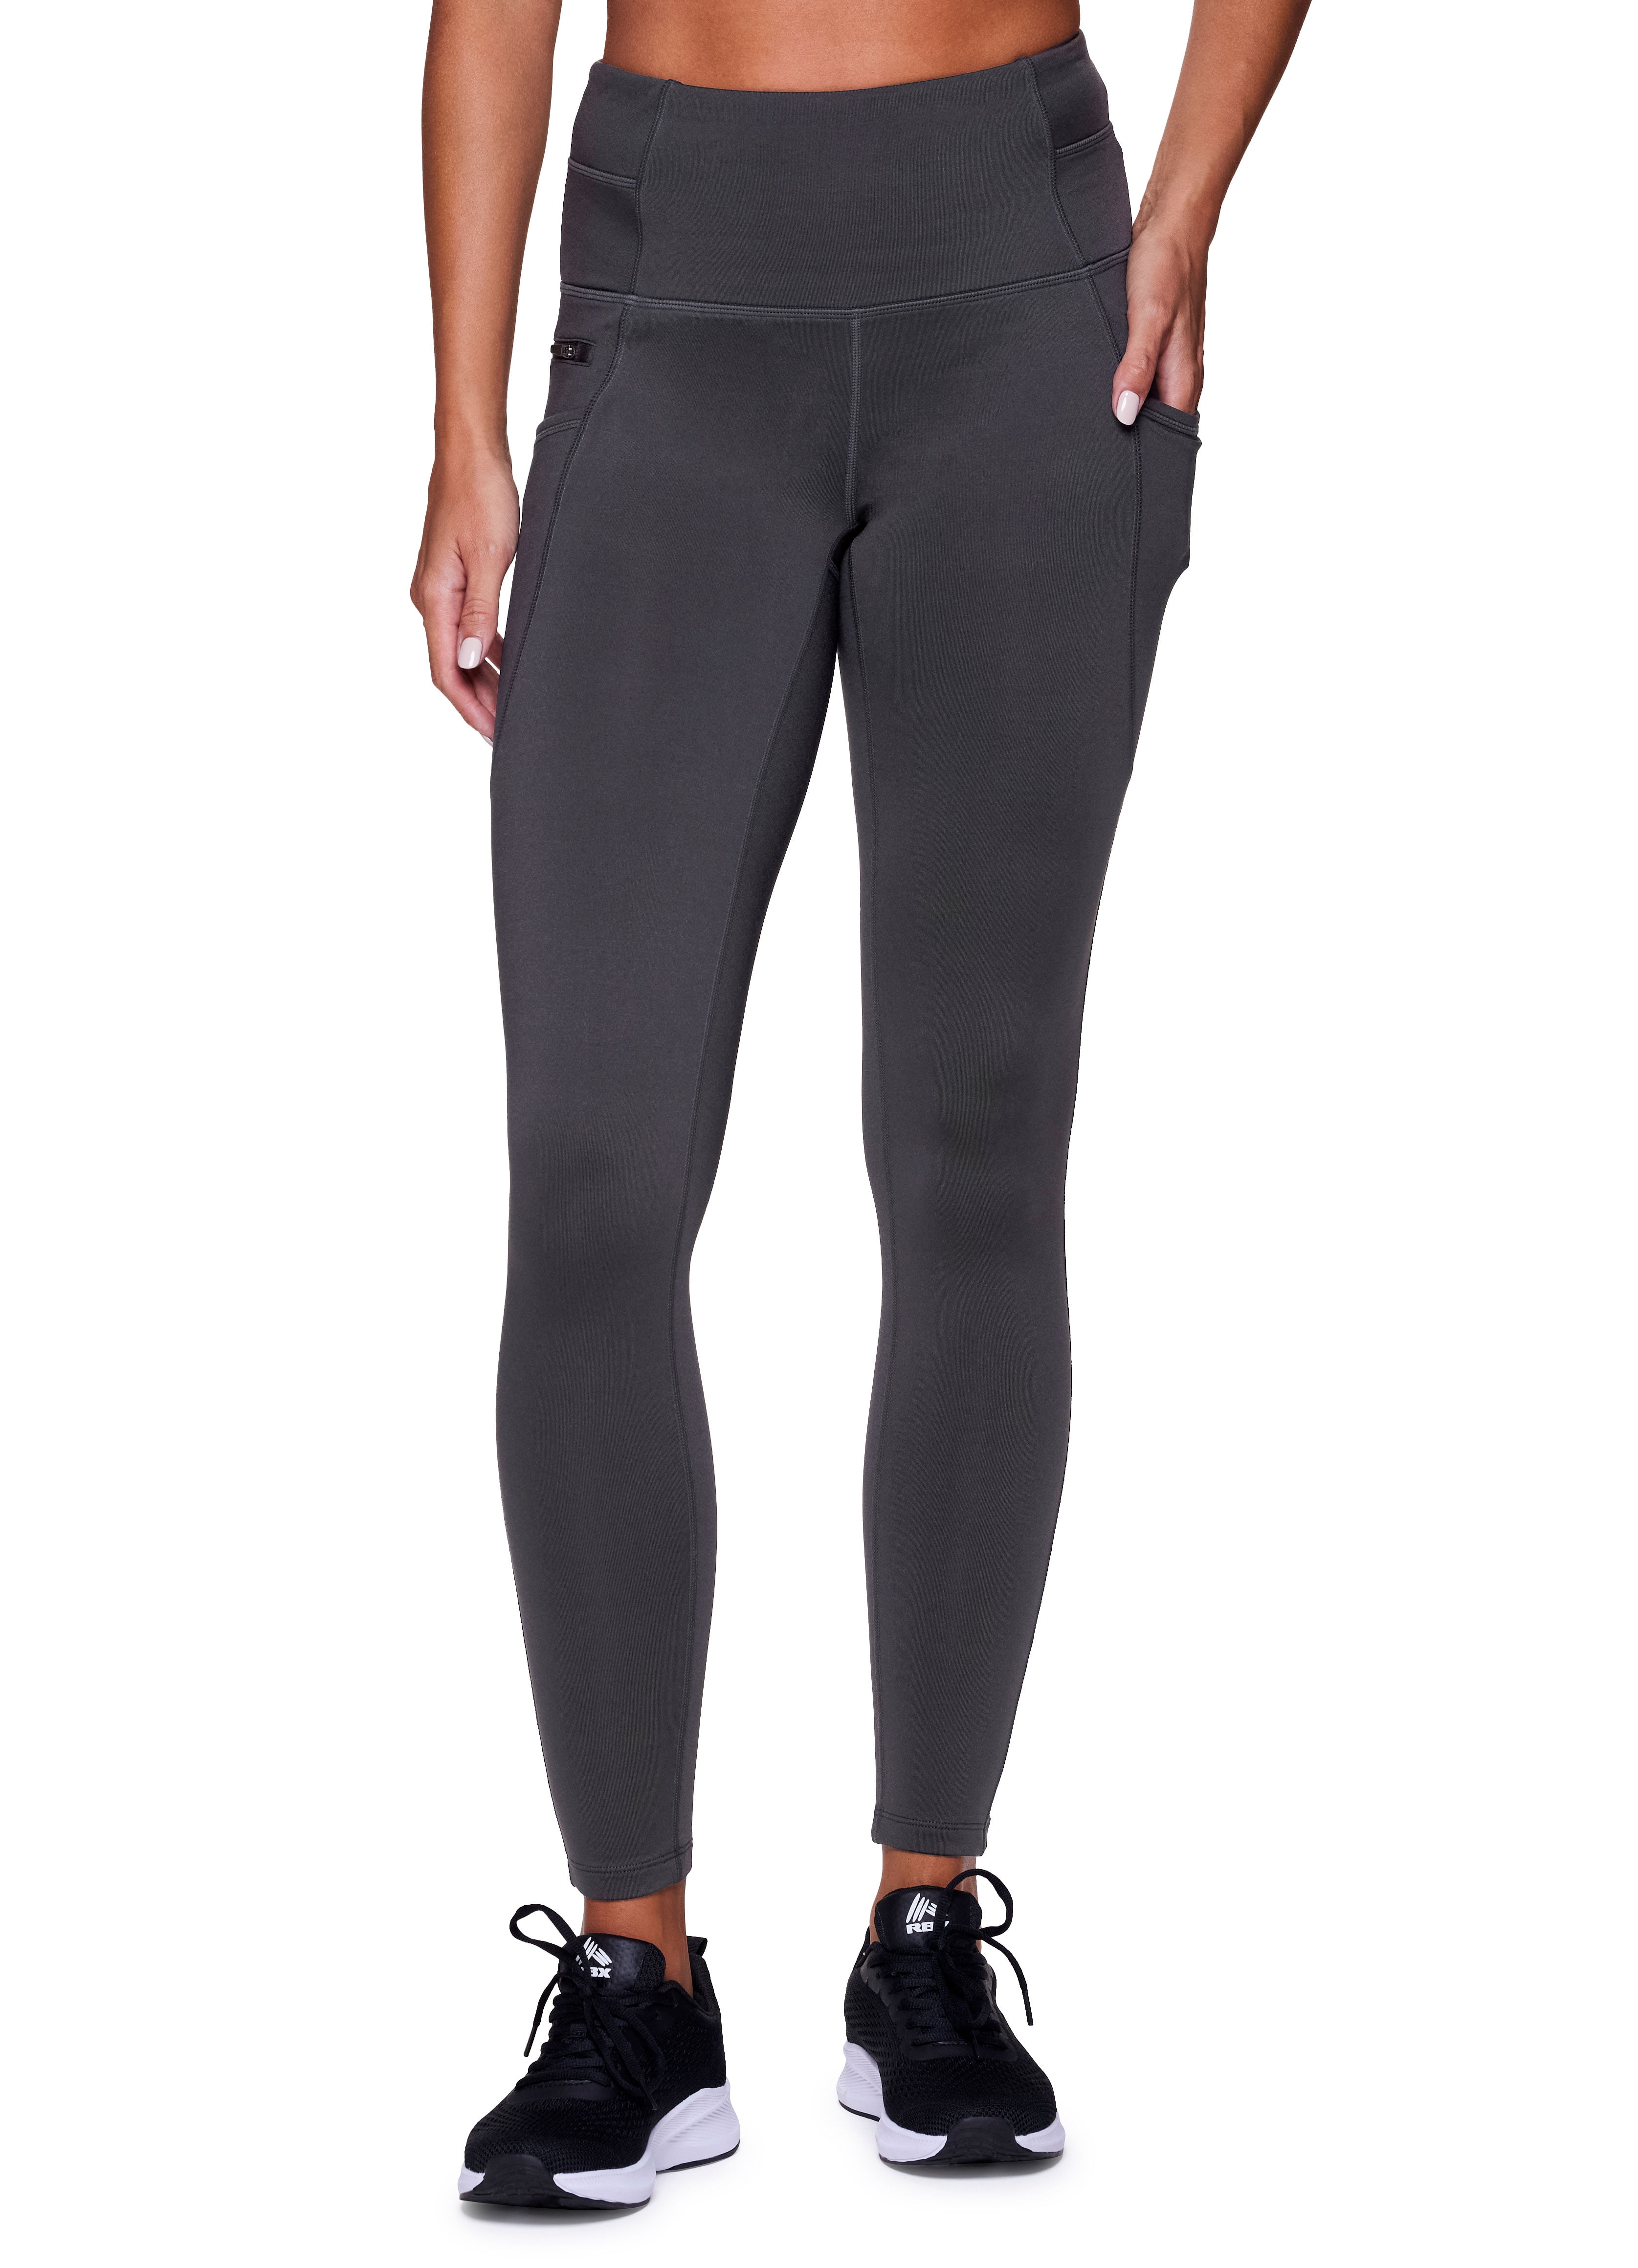 Rbx Active Black Leggings With Pockets Size L - $8 (60% Off Retail) - From  Katelyn